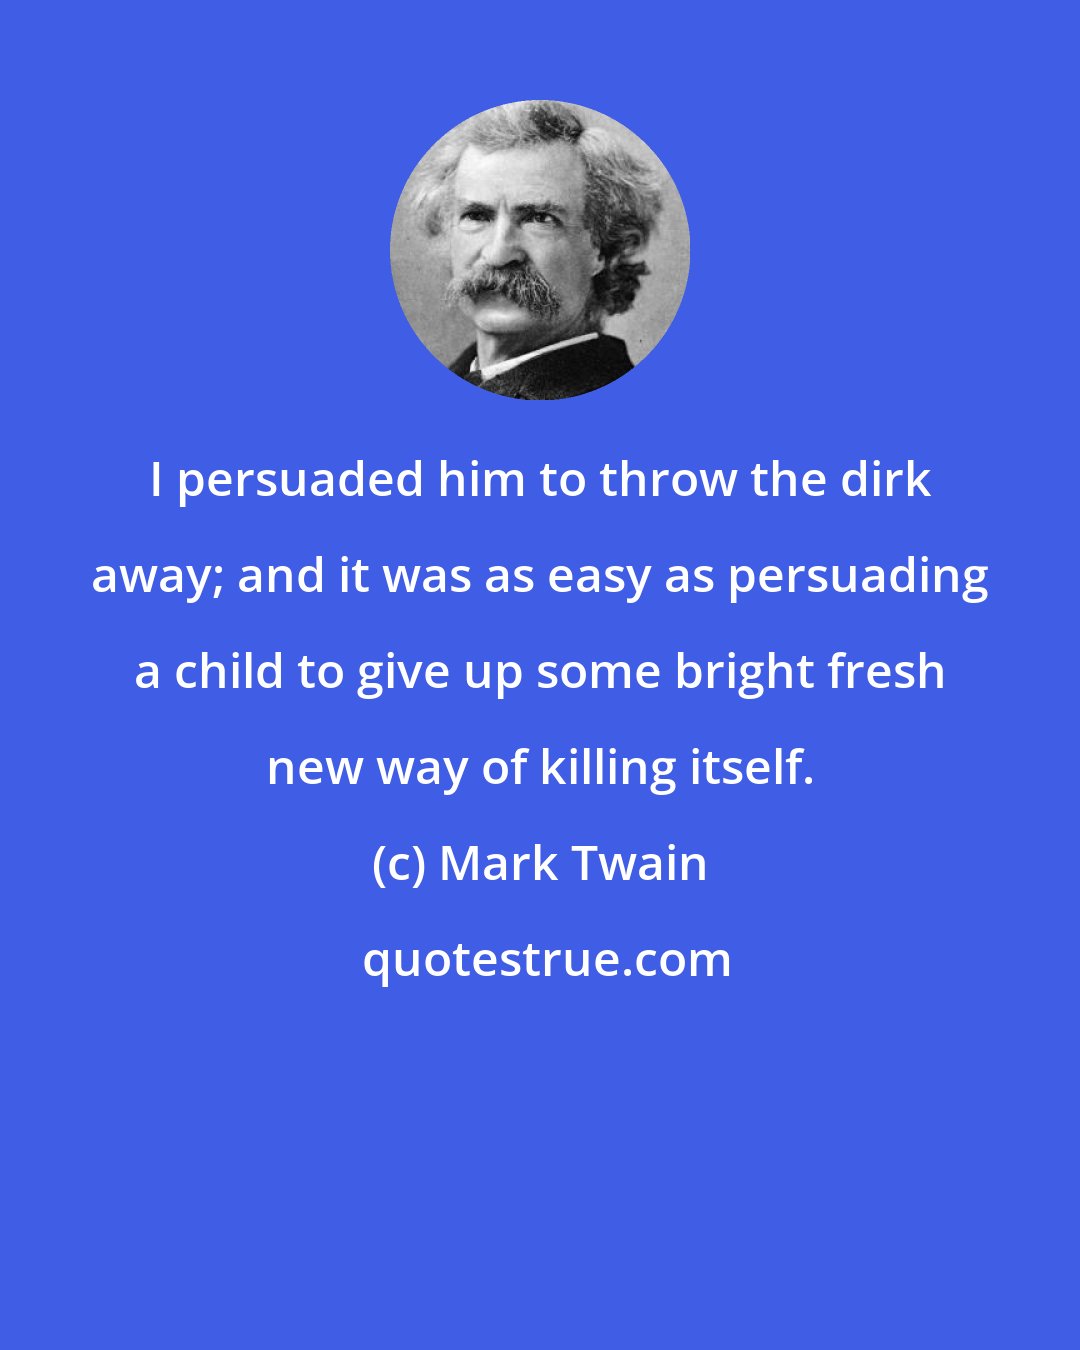 Mark Twain: I persuaded him to throw the dirk away; and it was as easy as persuading a child to give up some bright fresh new way of killing itself.